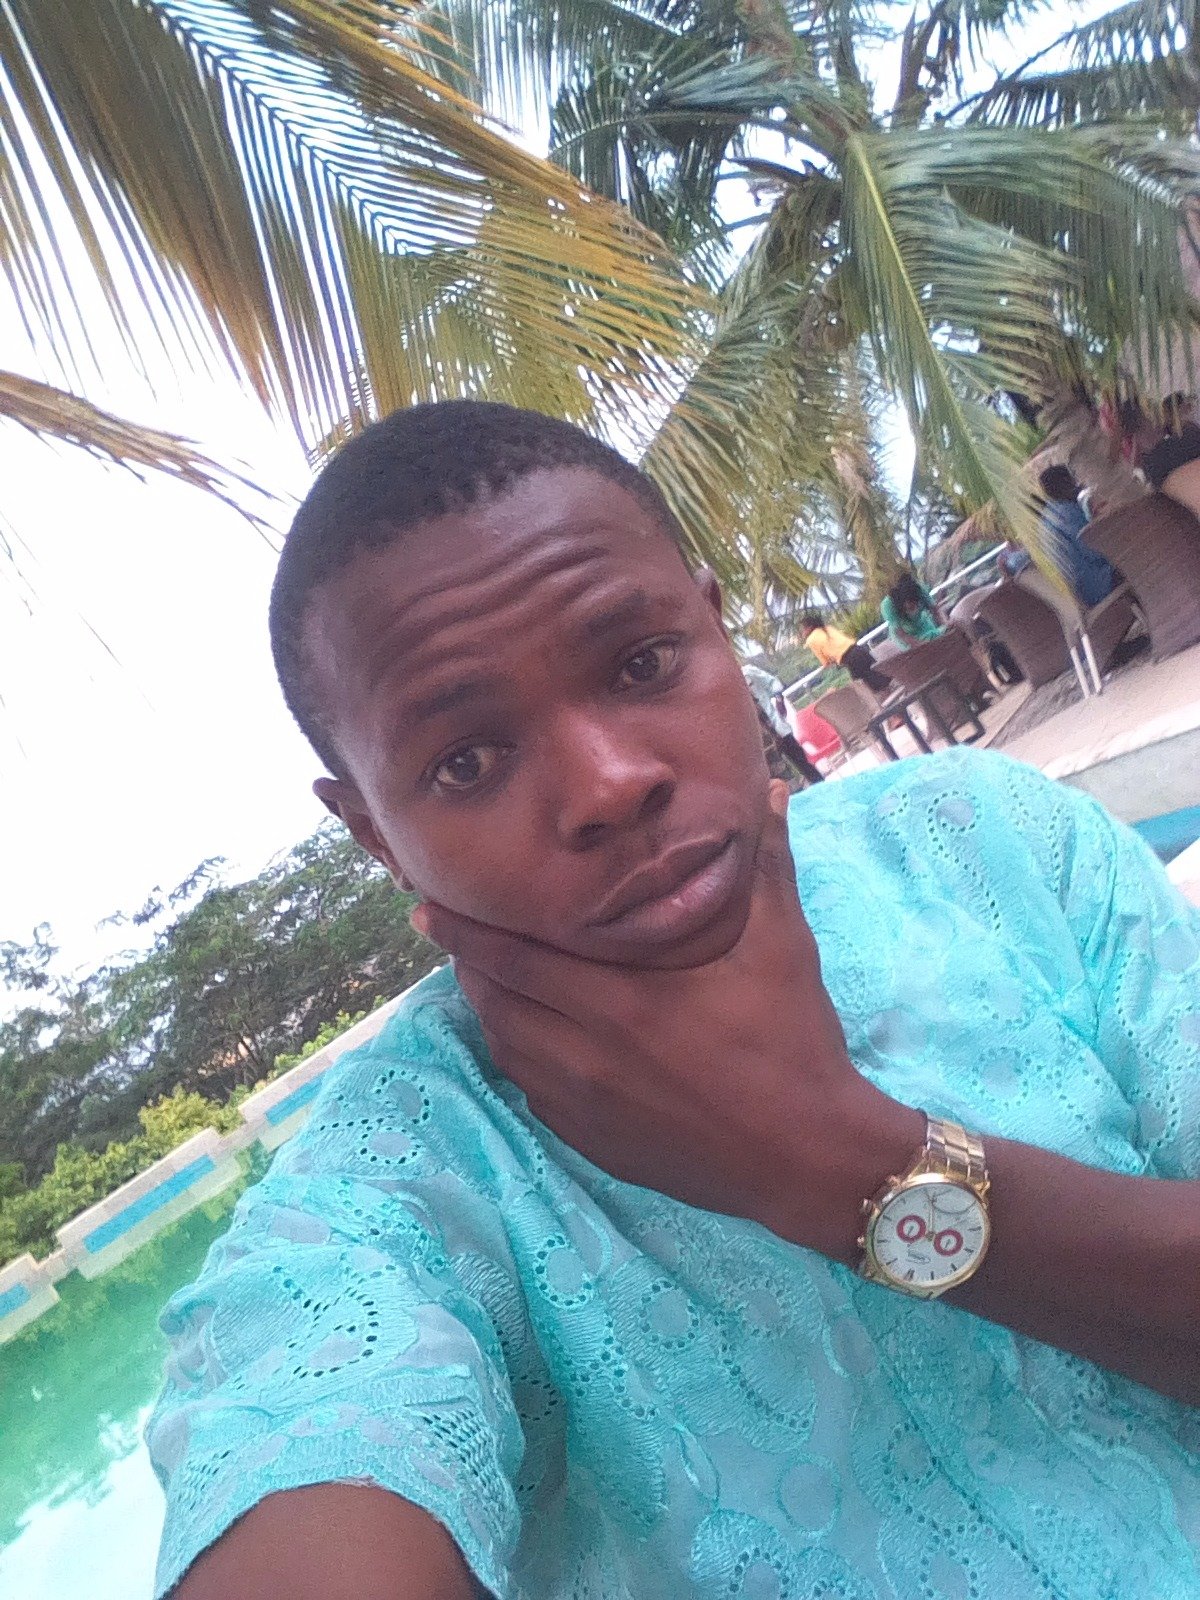 CEO UJU restaurant worldwide ...born handsome olowo shibi(spoon hand type Rotikay in Google you will gather information about me. We can b more than friends! DM